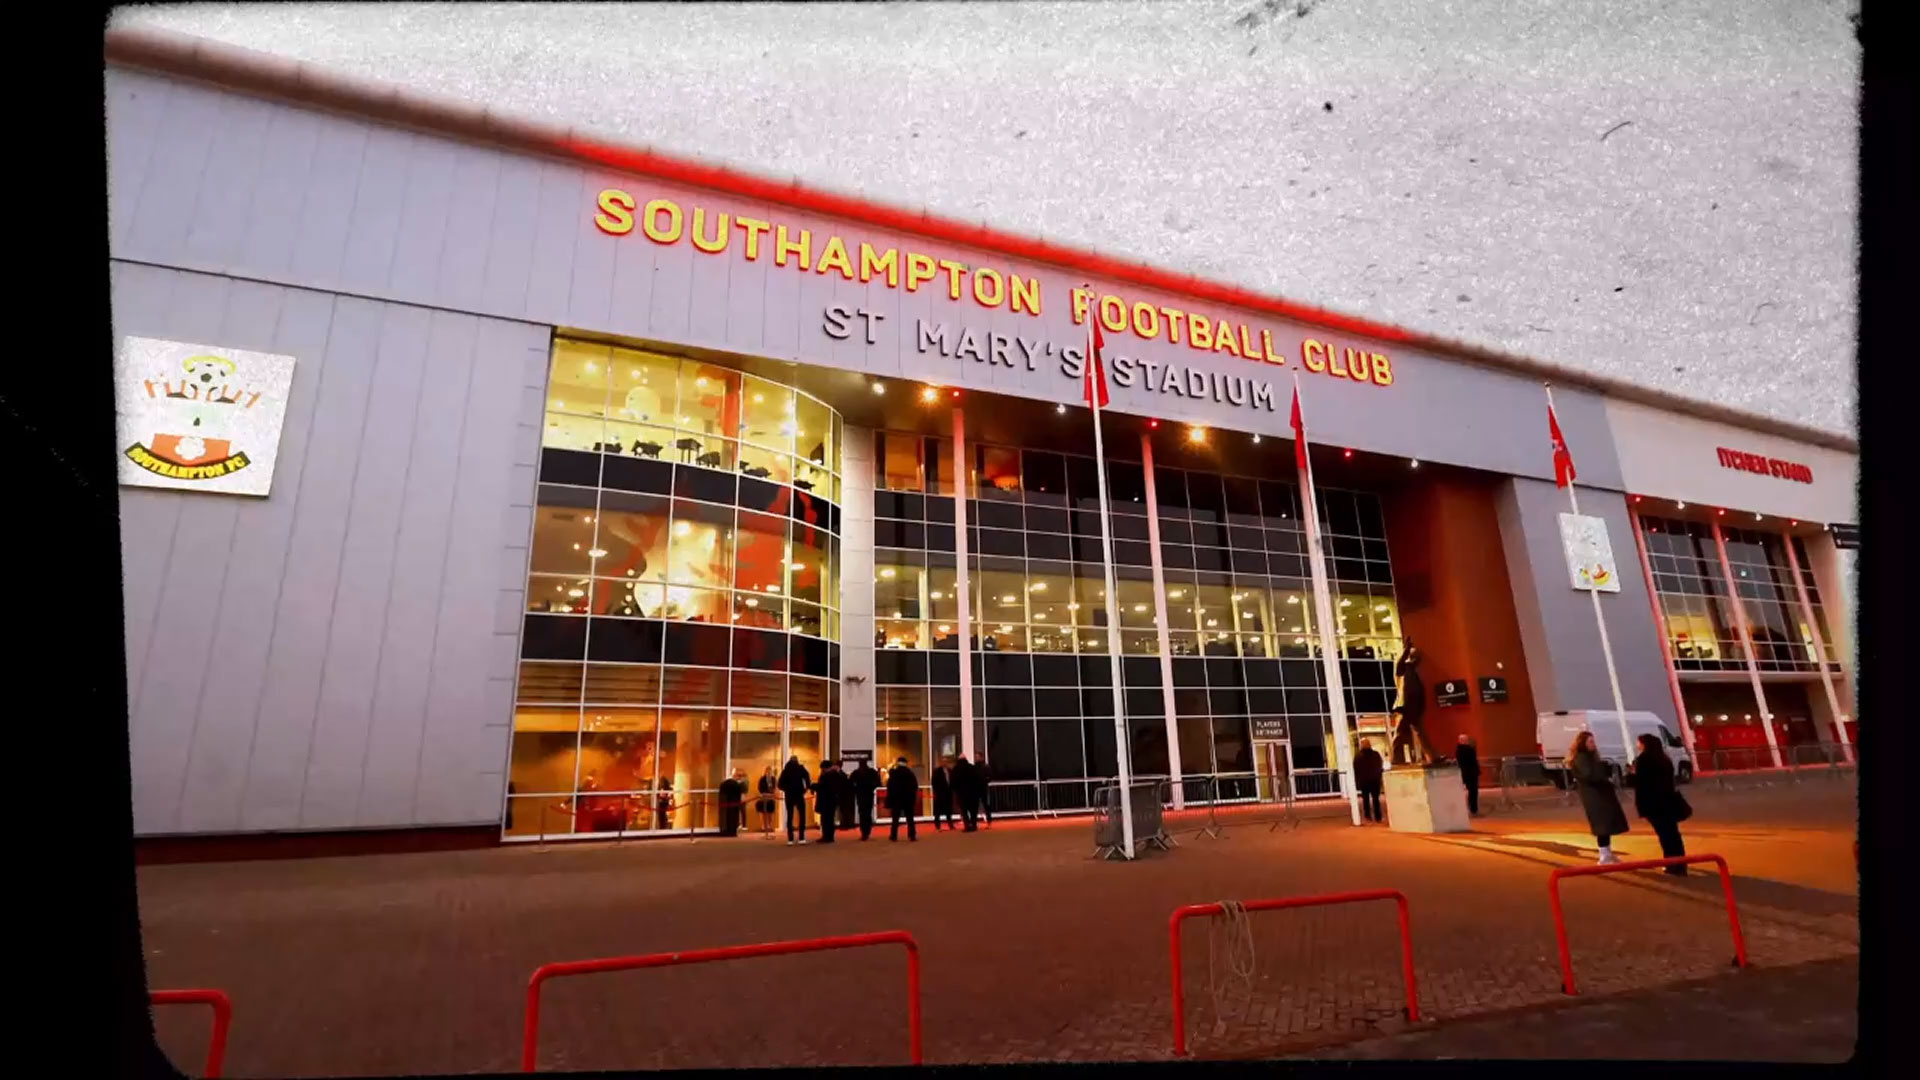 Southampton Football Club captured fan attention with a personalised decade in review powered by Idomoo’s Next Generation Video Platform.